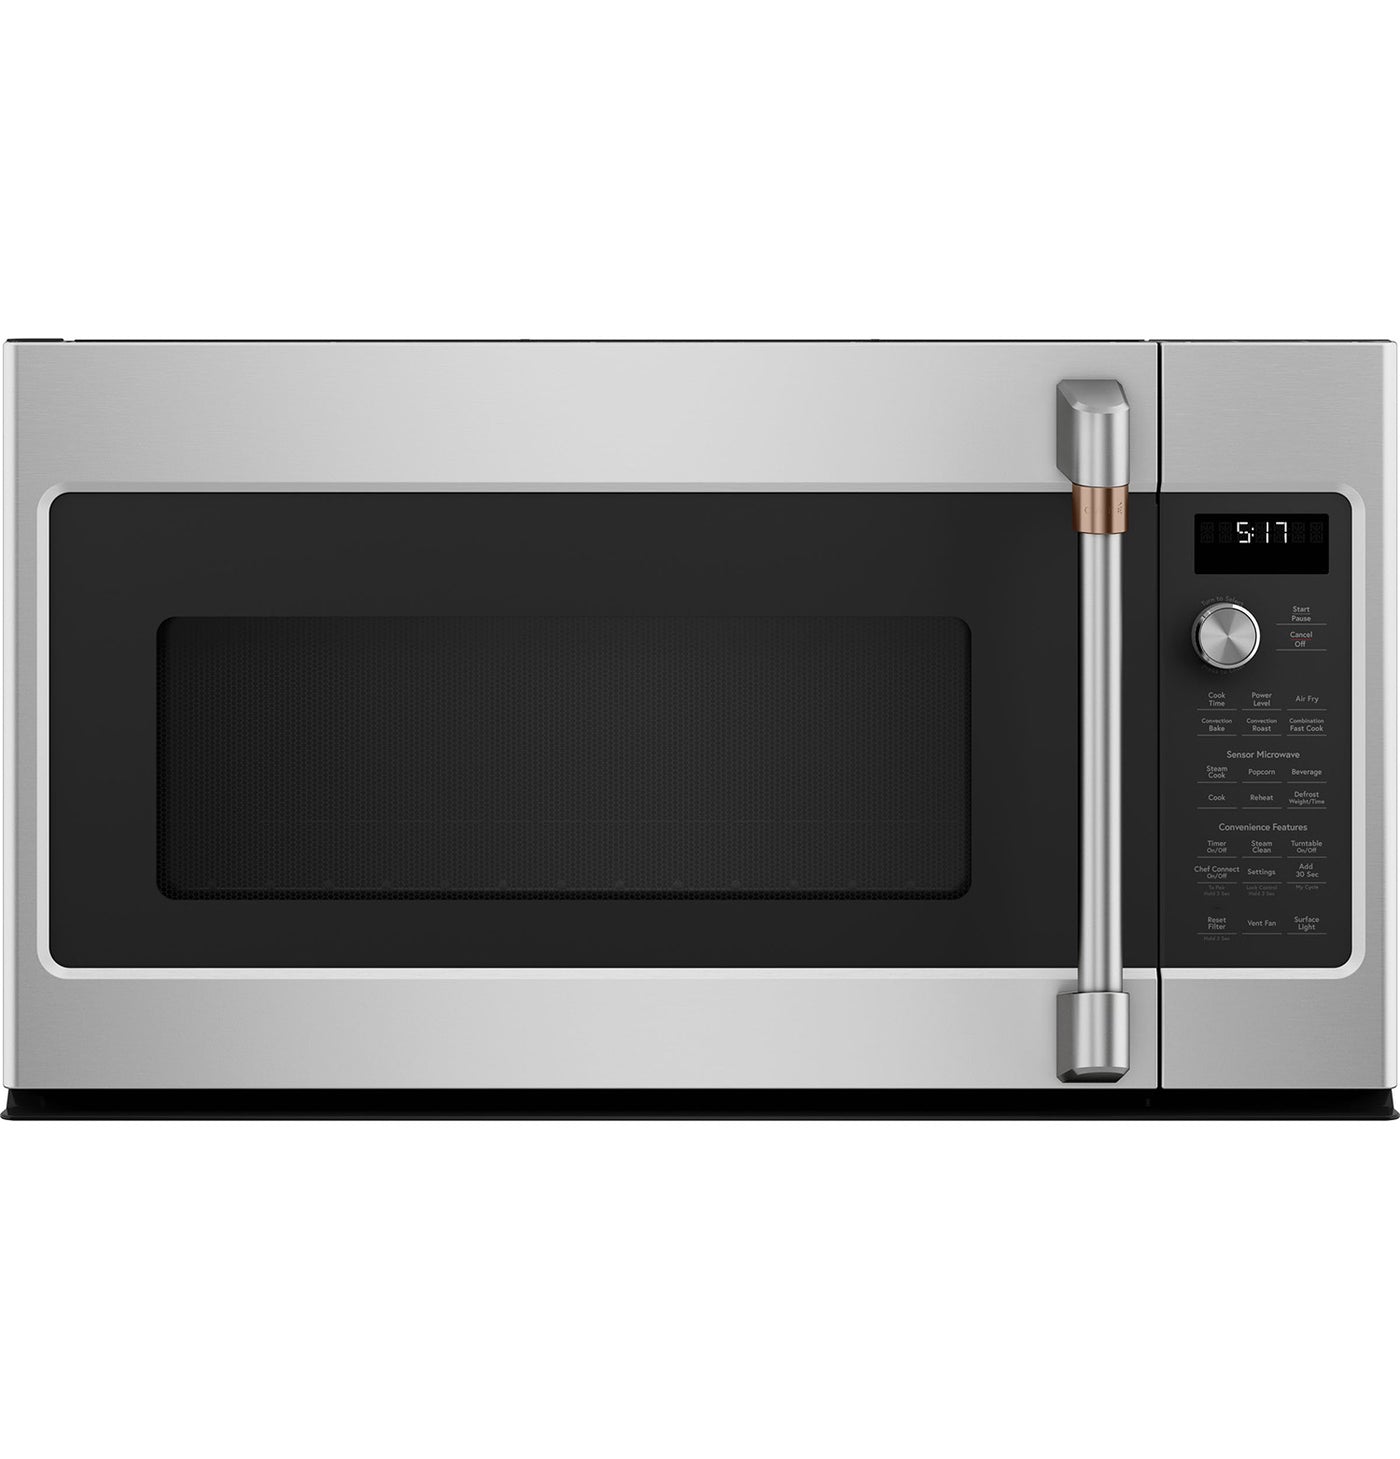 Café Stainless Steel Convection Over-The-Range Microwave (1.7 Cu Ft)- CVM517P2RS1